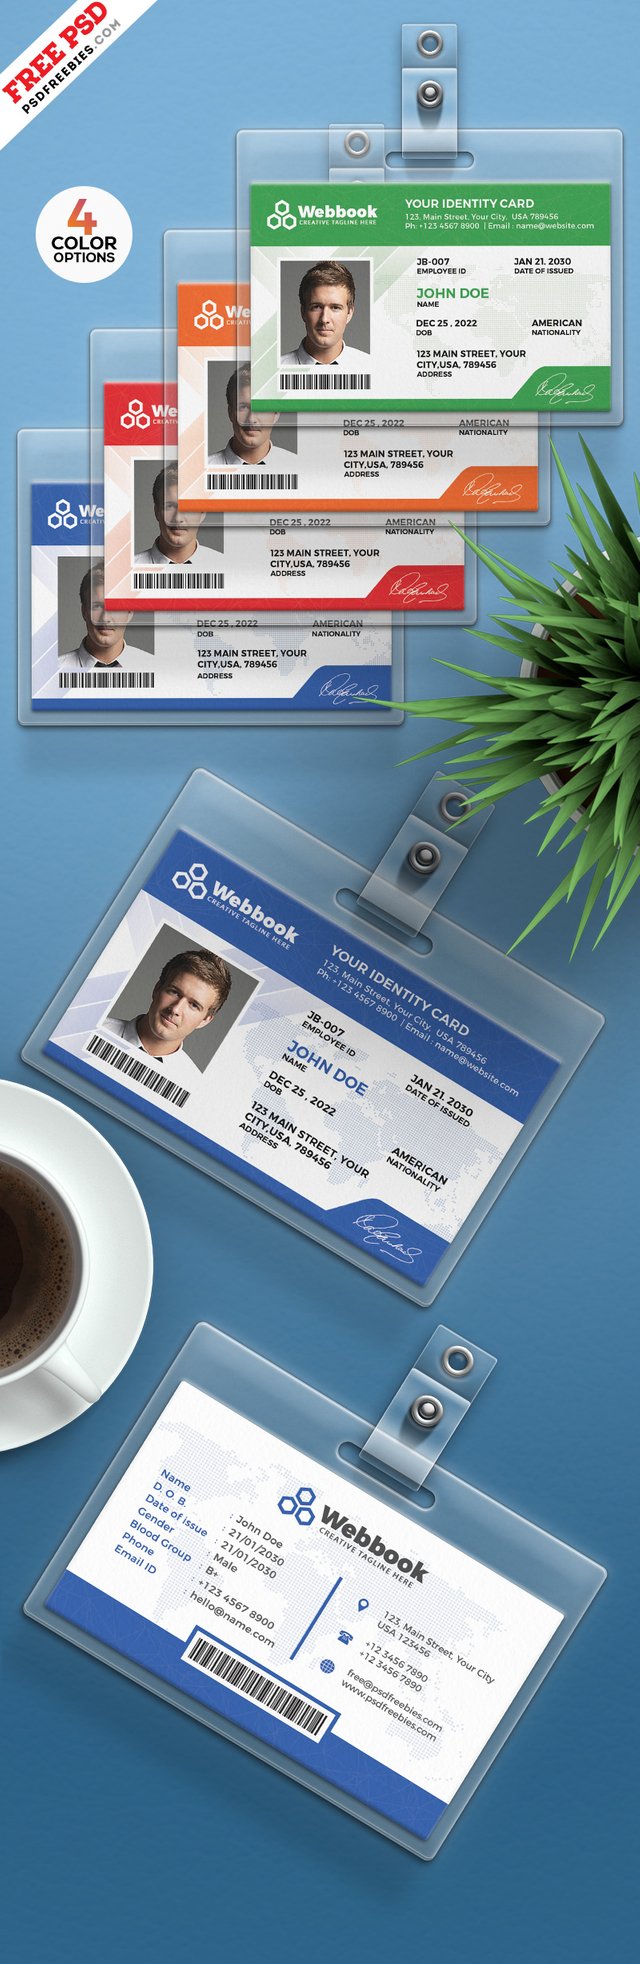 Free-ID-Card-Template-PSD-Set-Preview.jpg